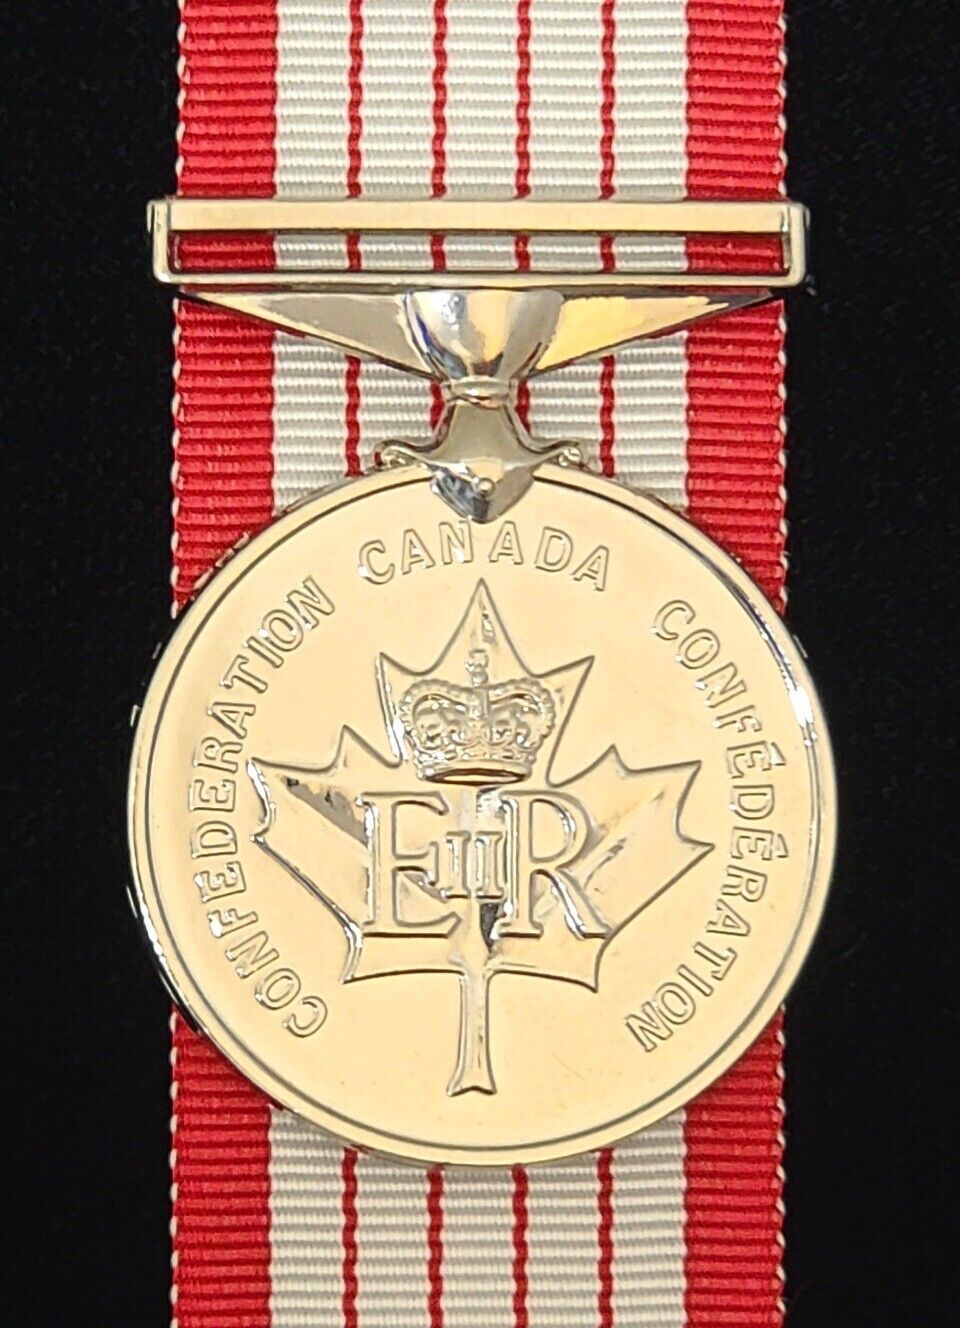 Canadian Centennial Medal, Full Size Reproduction